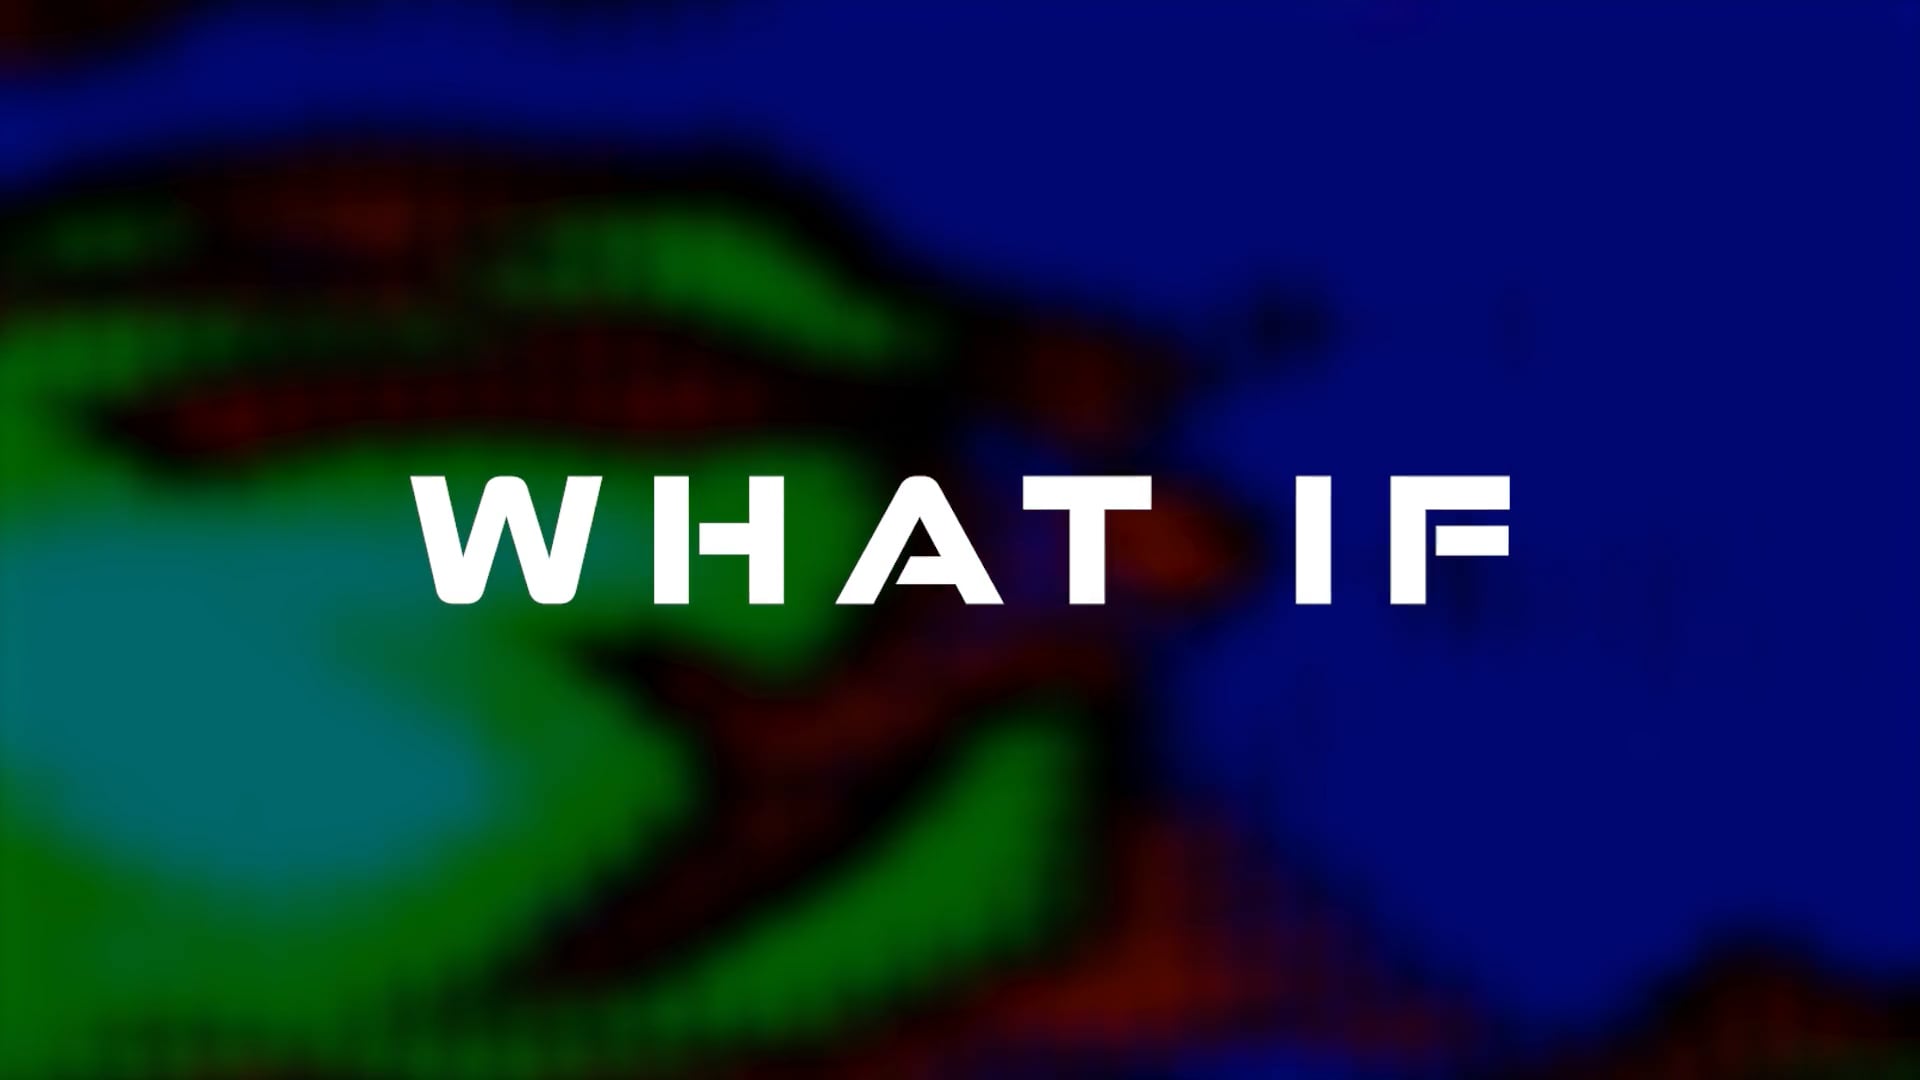 WHAT IF (planet heaven)